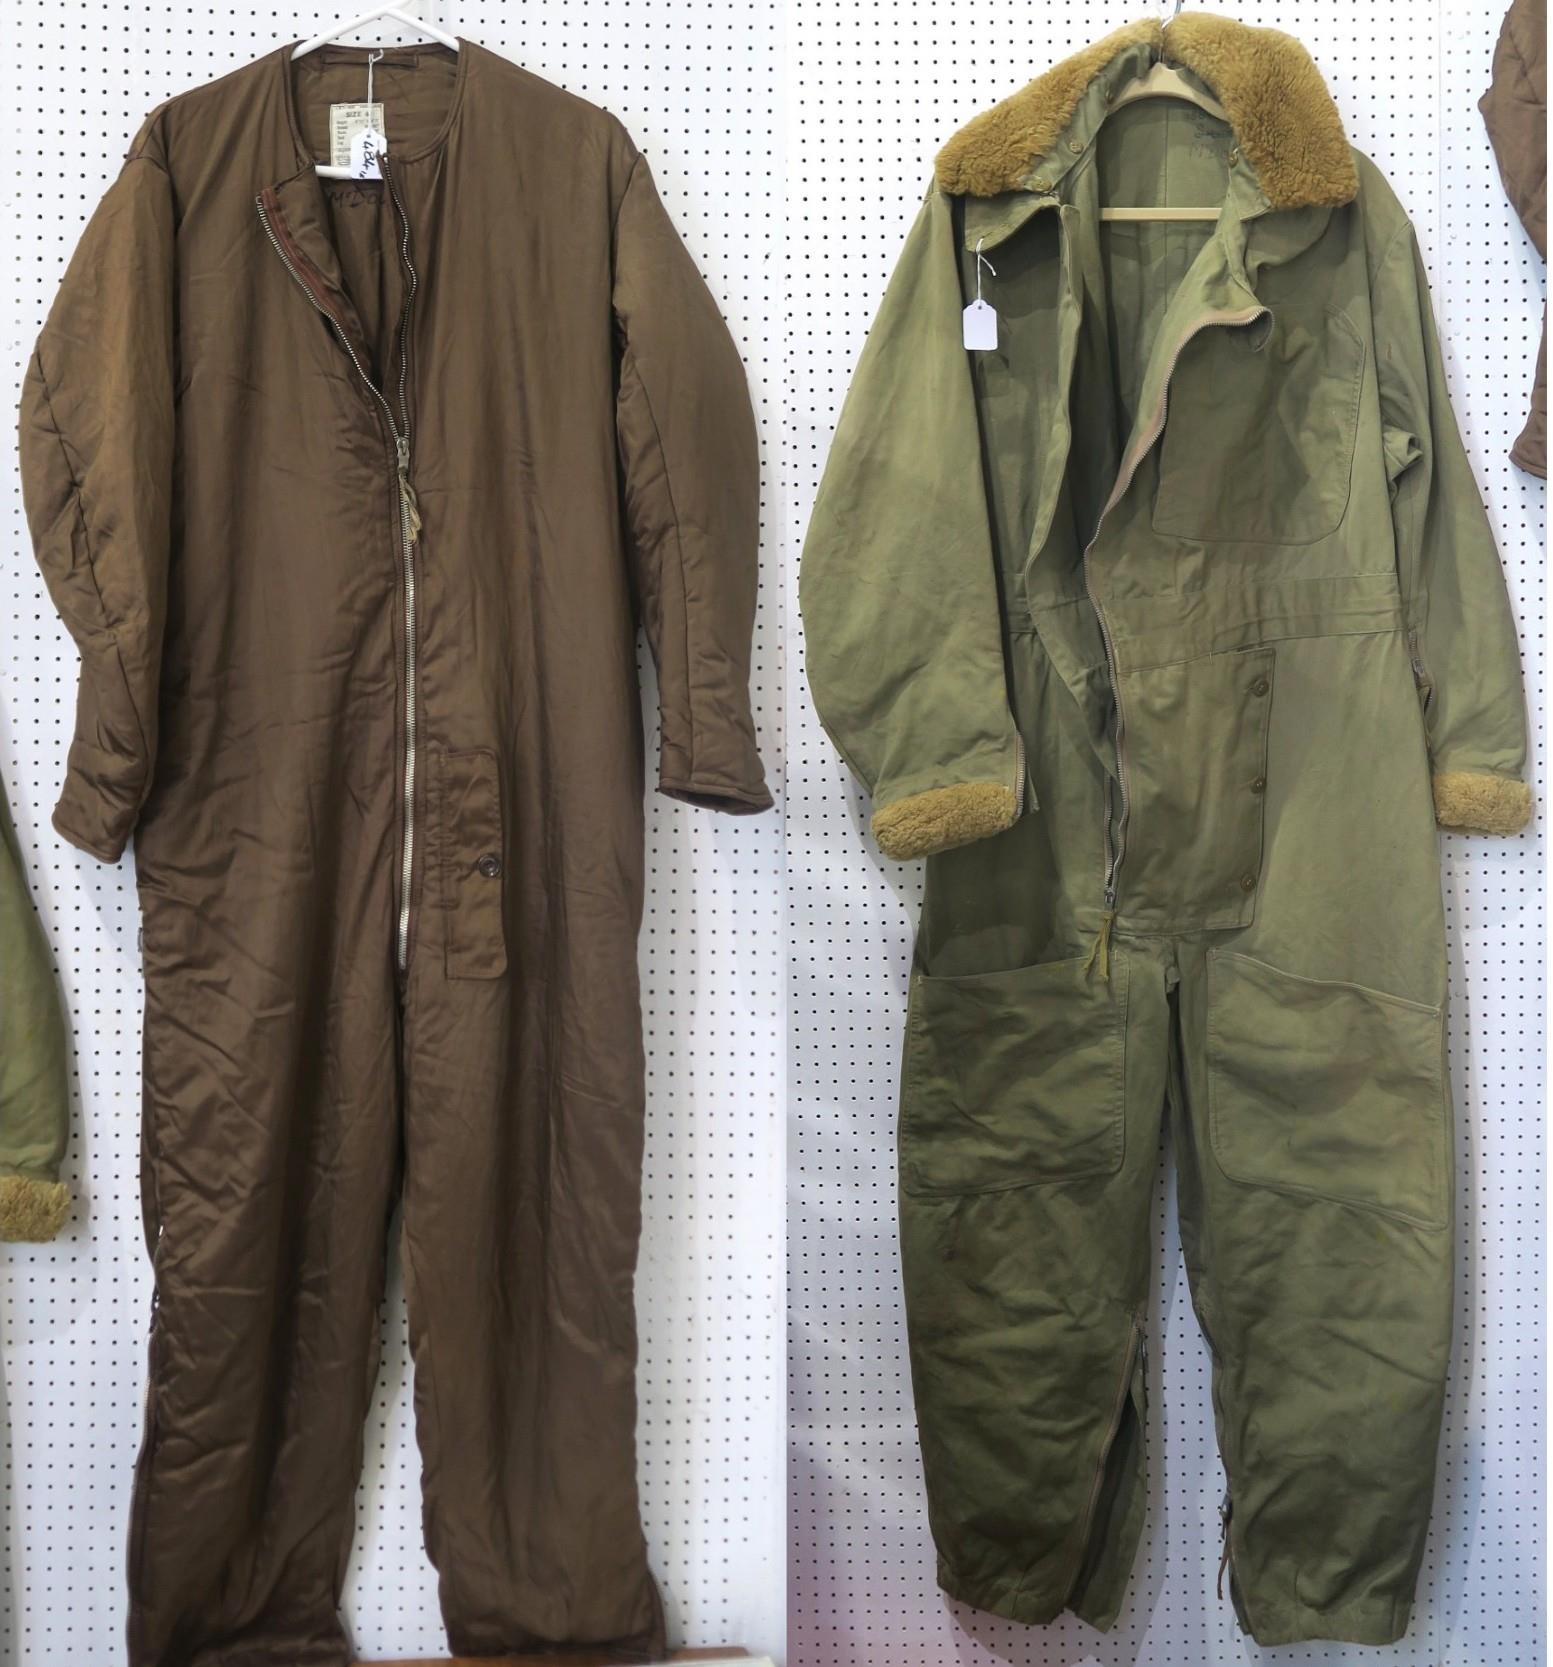 A WW2 RAF 1940 pattern Sidcot flying suit, size no. 6, with fleece-trimmed cuffs and detachable